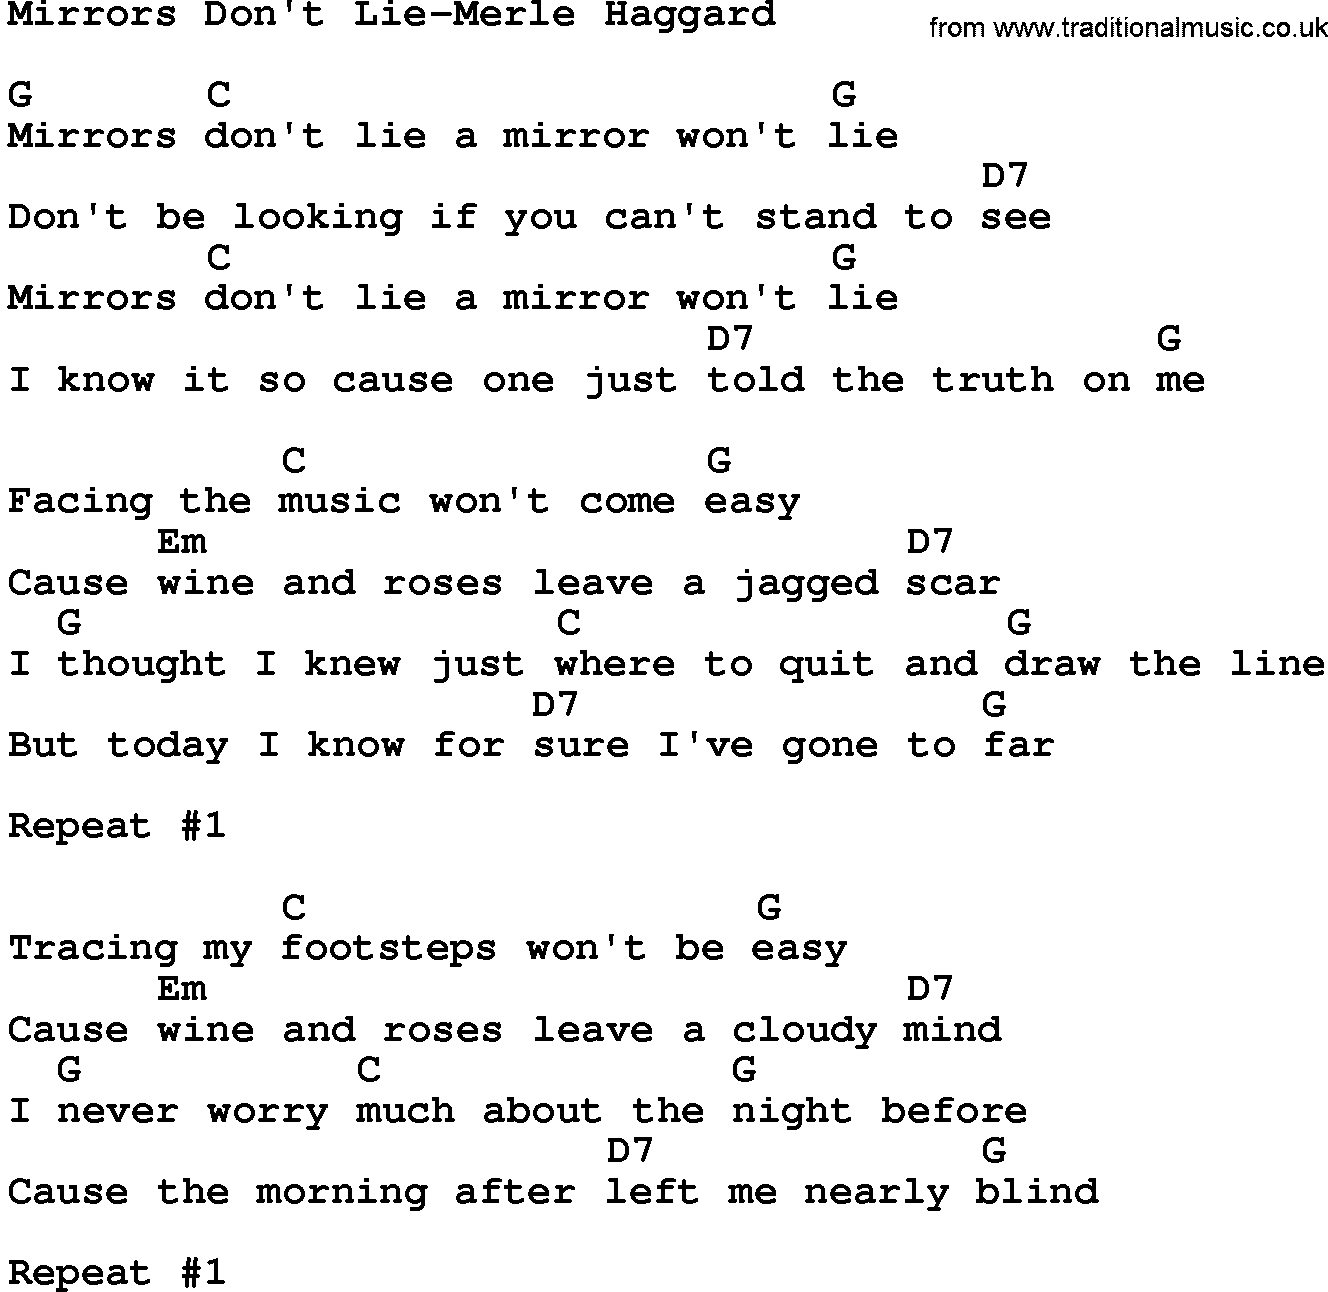 Country music song: Mirrors Don't Lie-Merle Haggard lyrics and chords